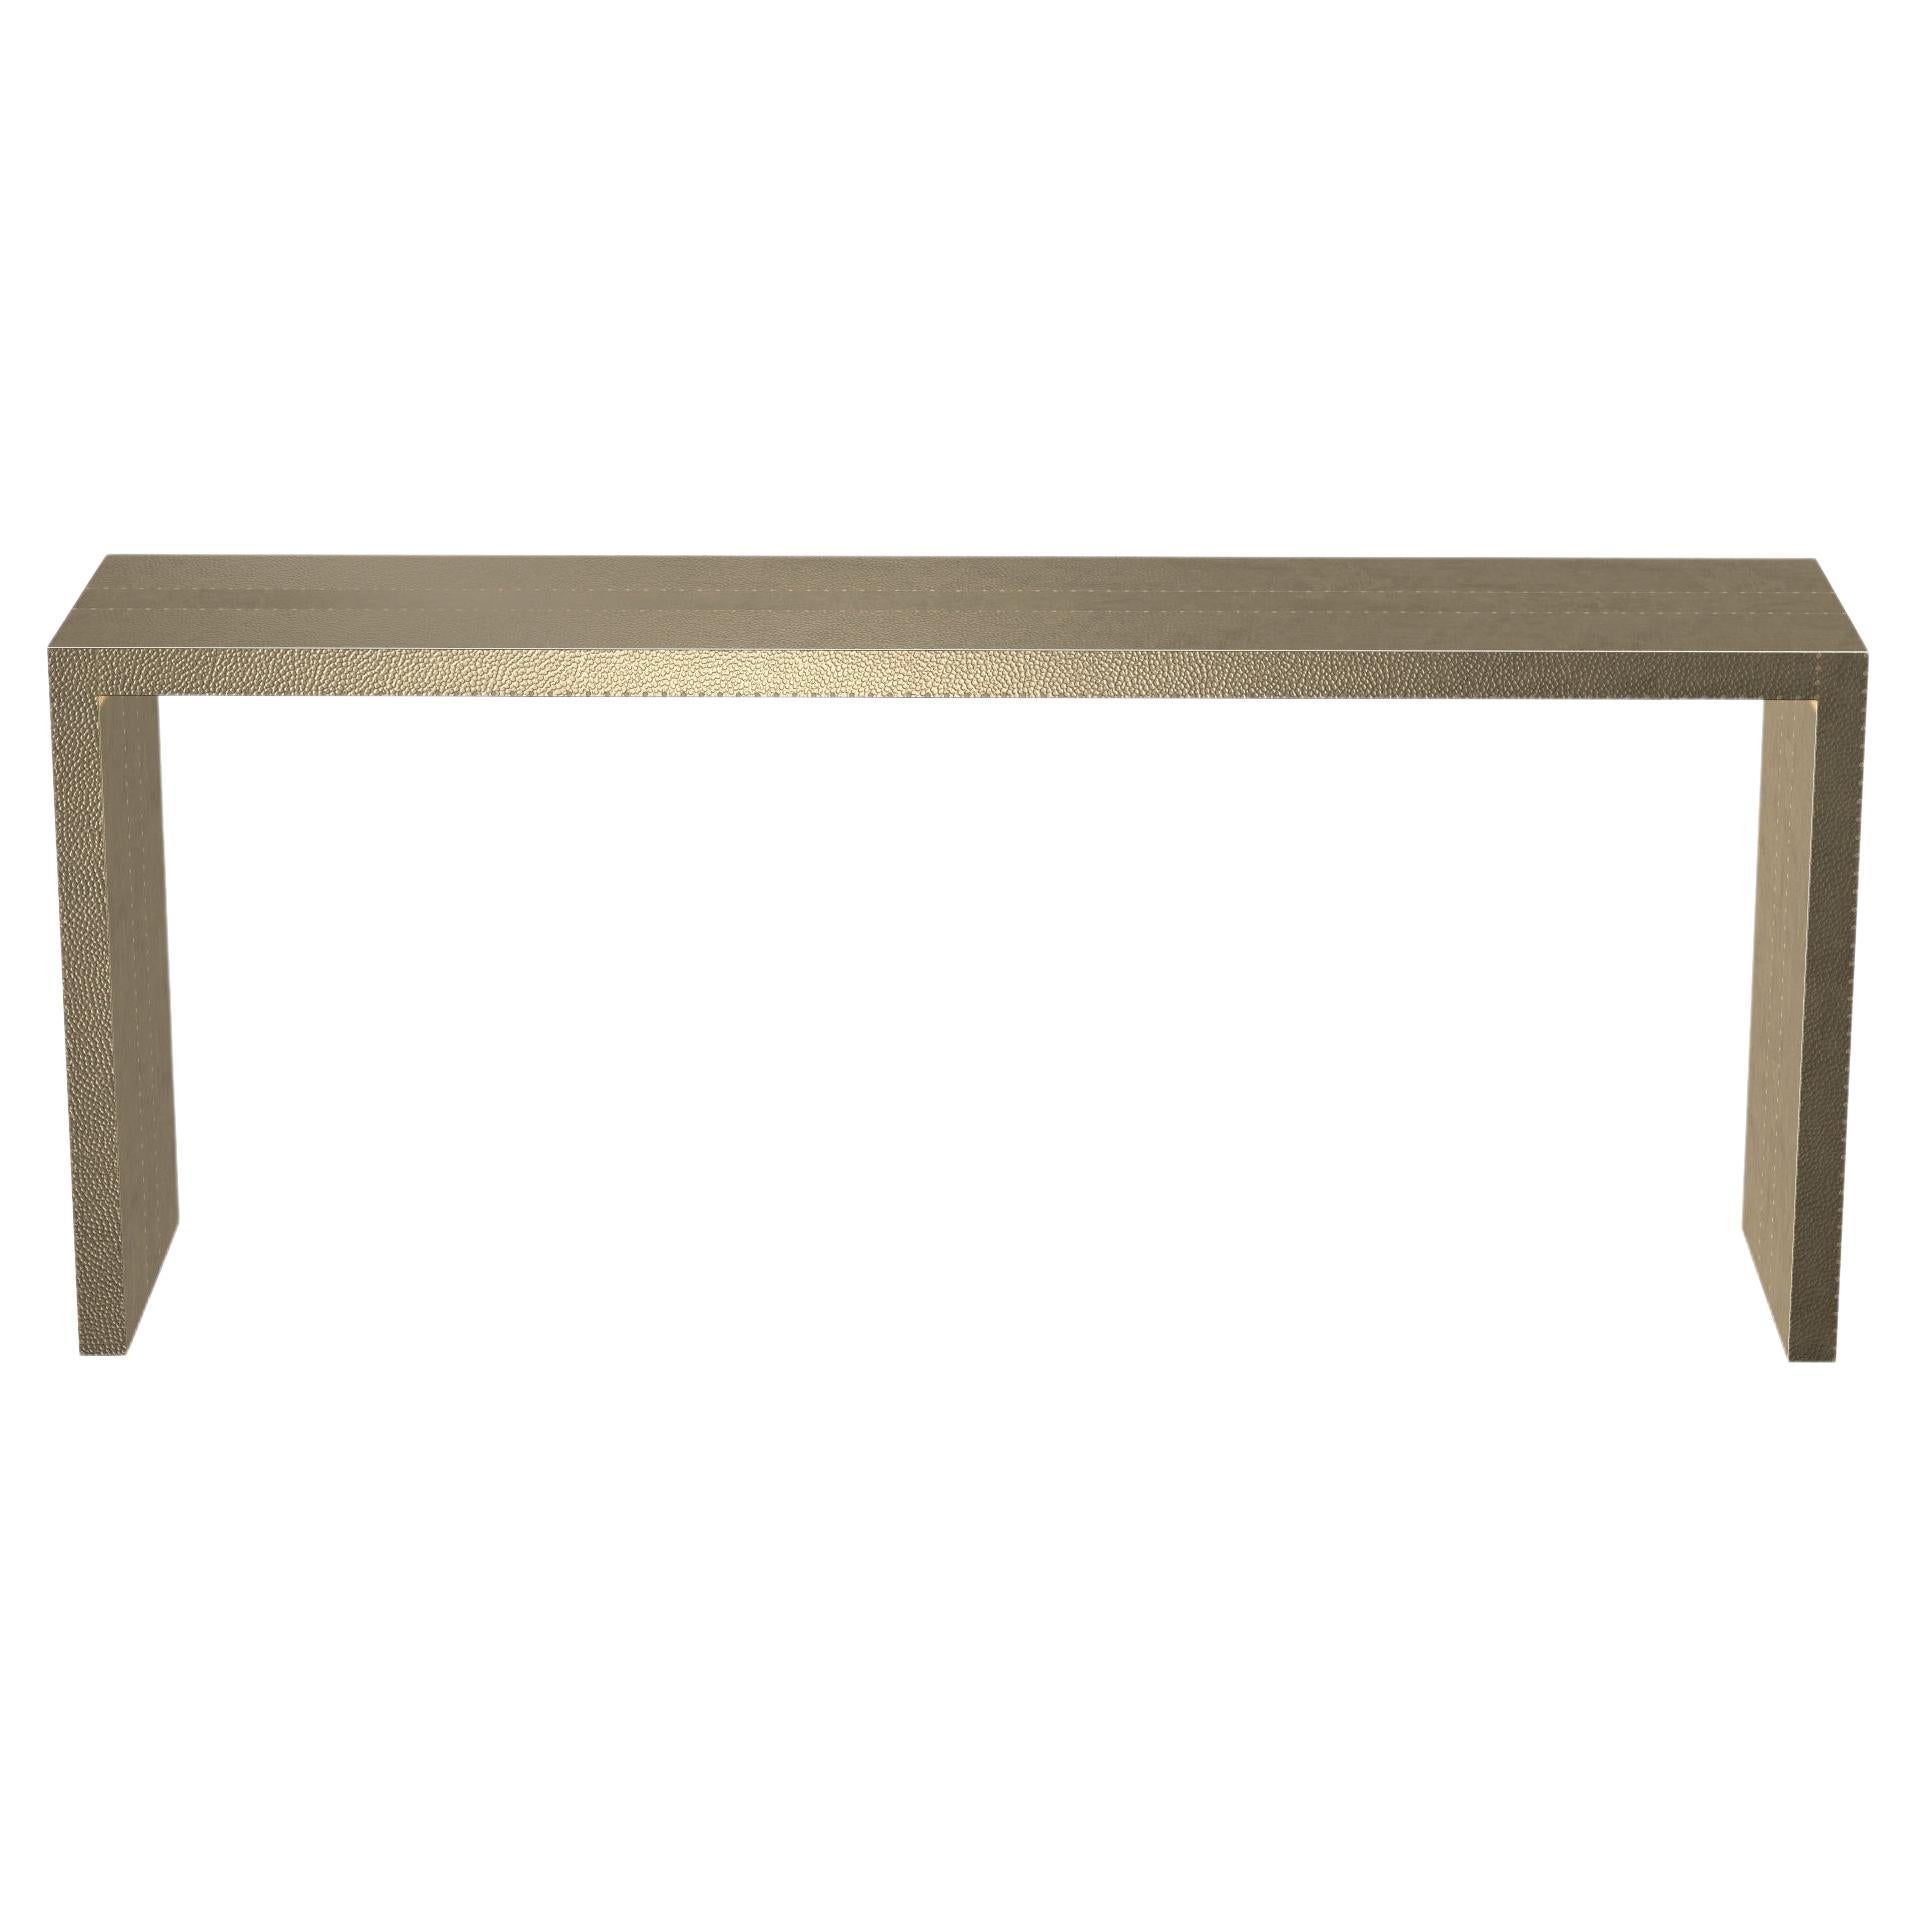 Art Deco Industrial and Work Console Tables Mid. Hammered in Brass  by Alison S